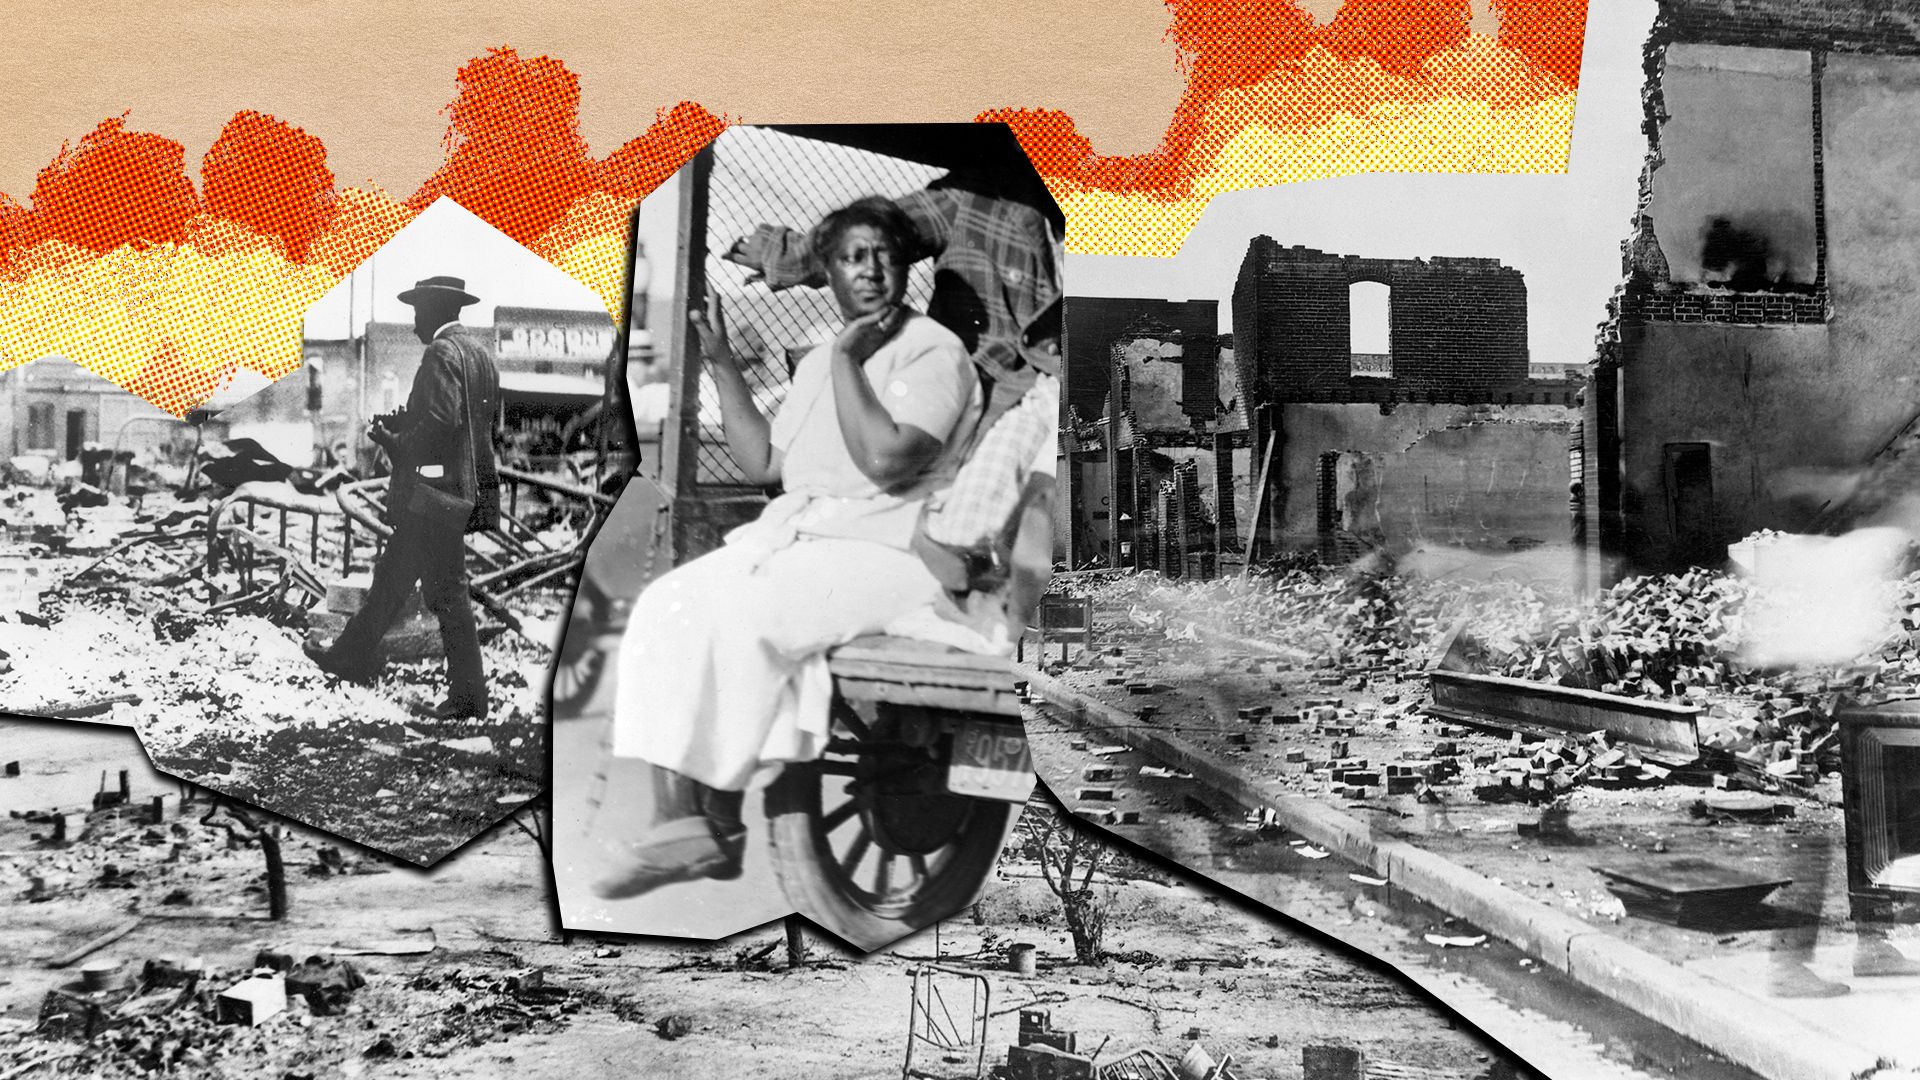 Photo illustration collage of archival photography from the Tulsa Race Massacre.